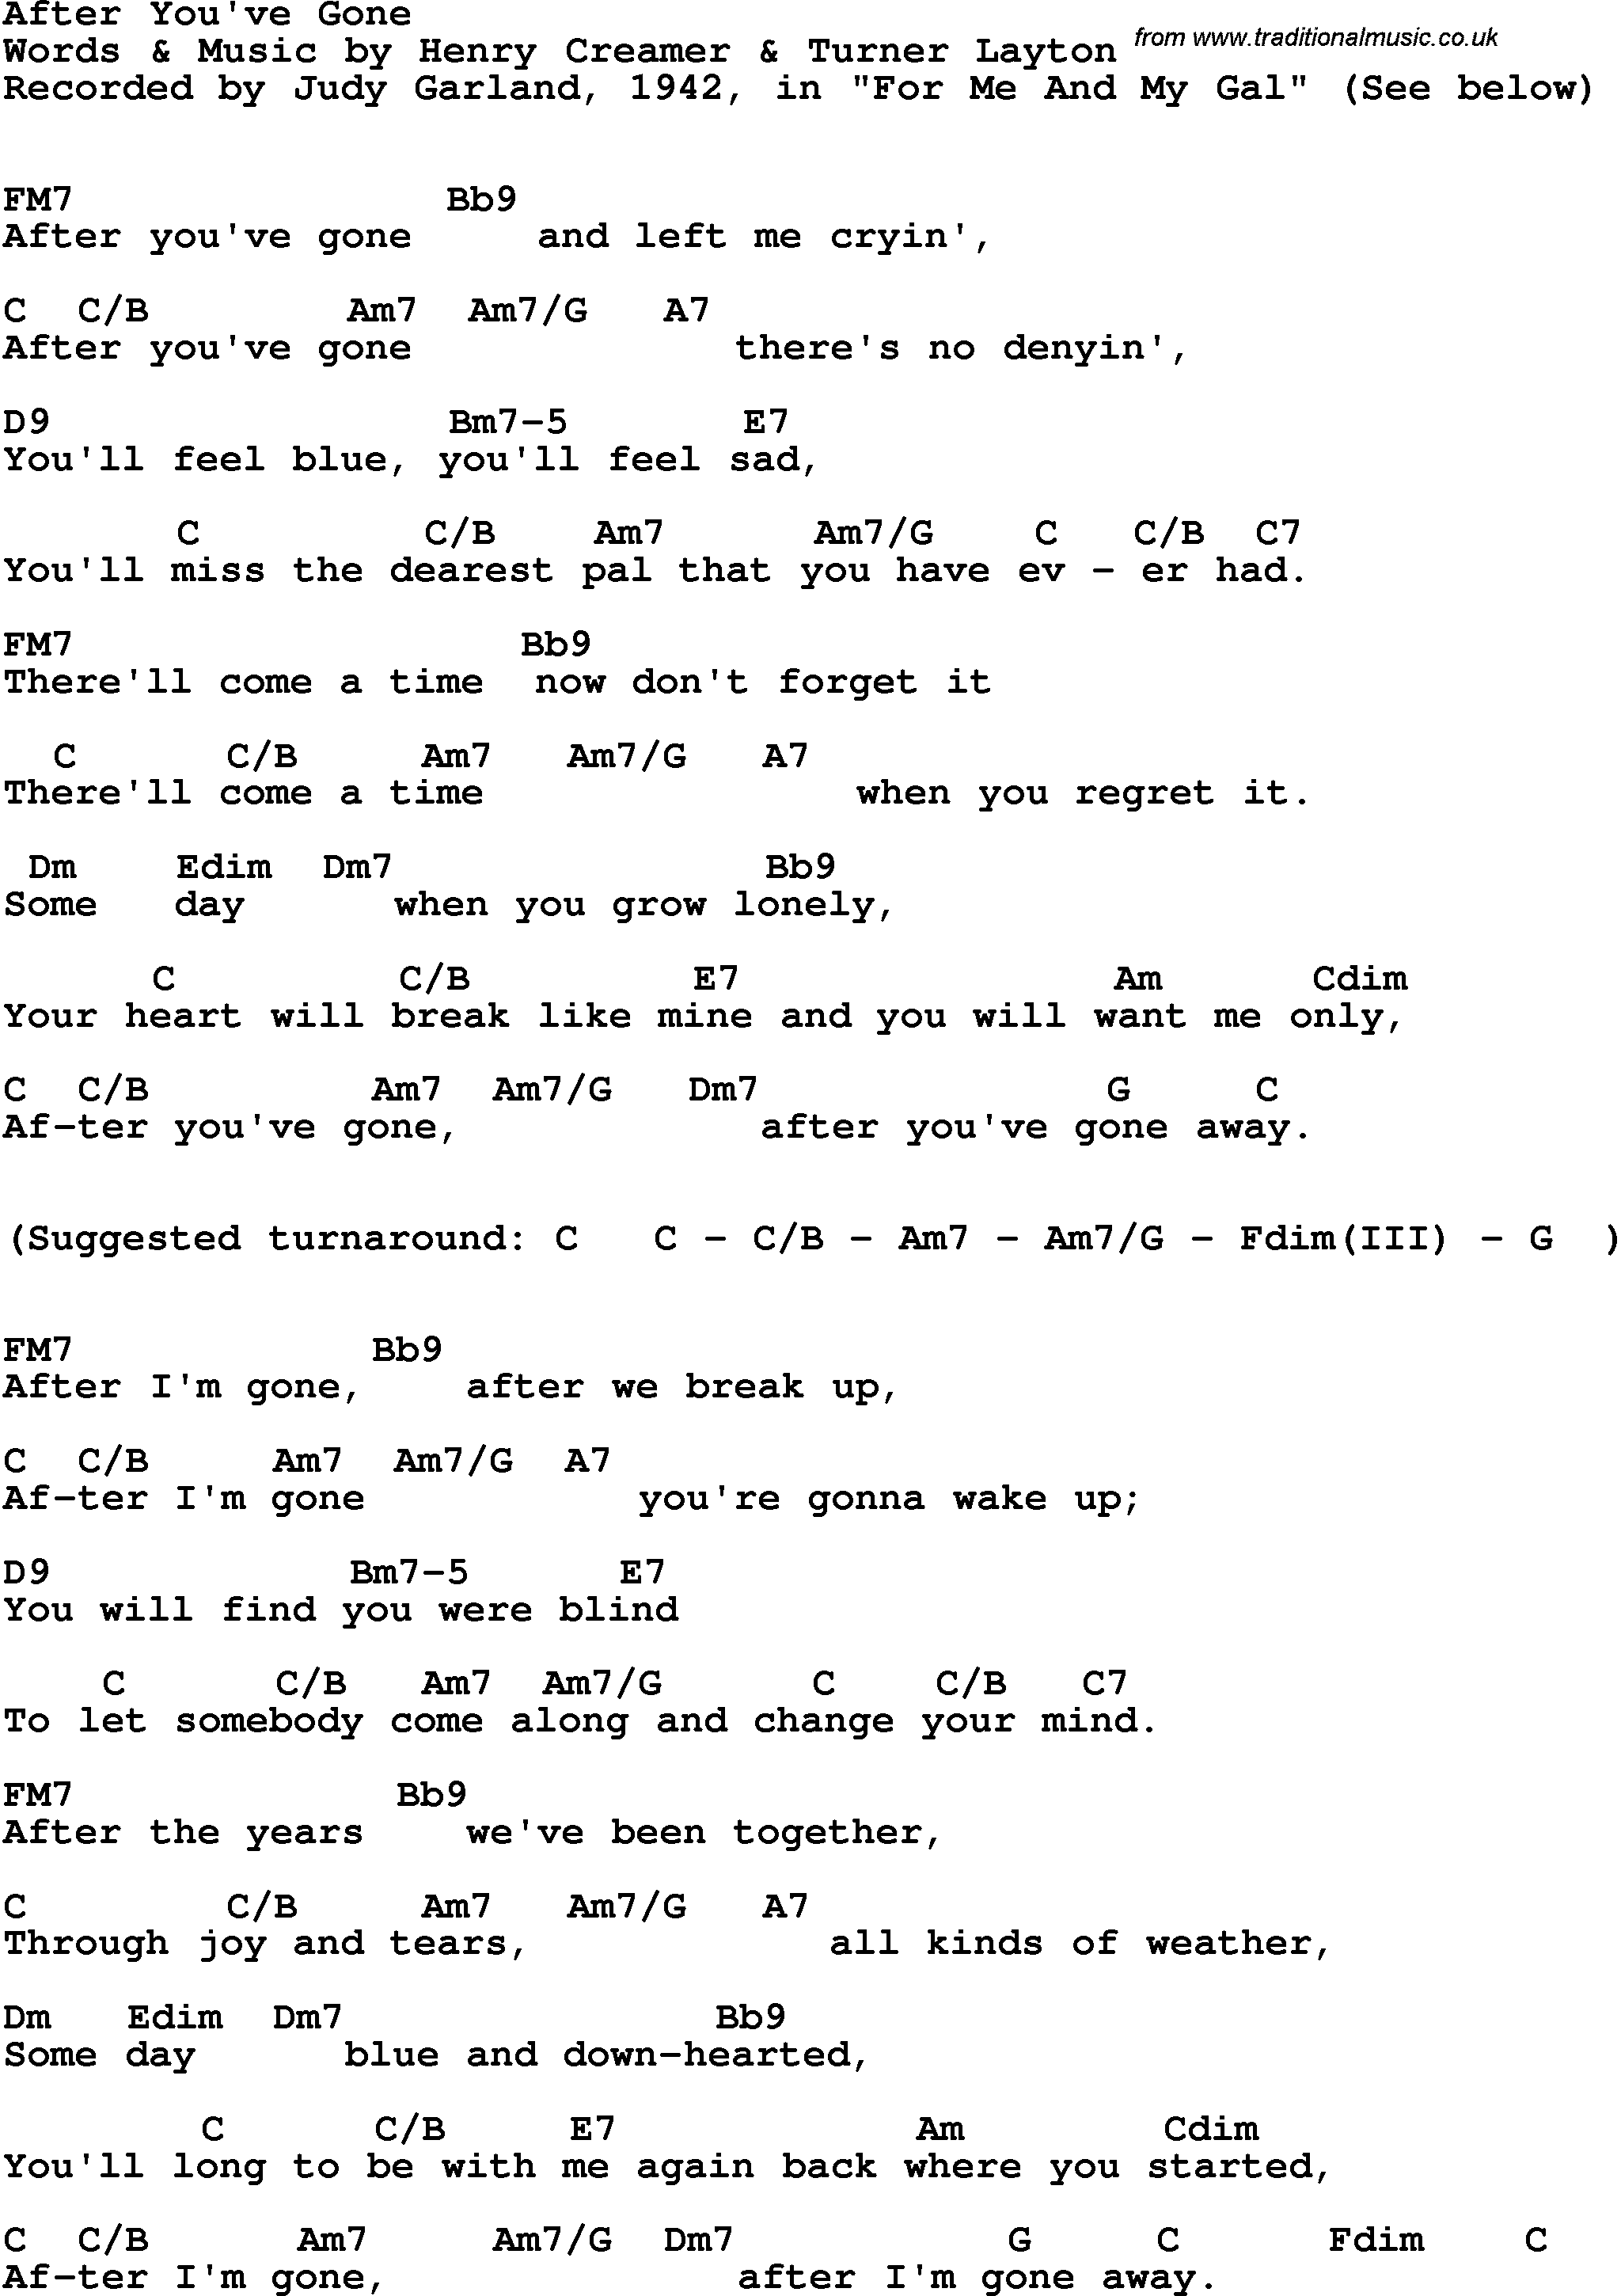 Song Lyrics with guitar chords for After You've Gone - Judy Garland, 1942